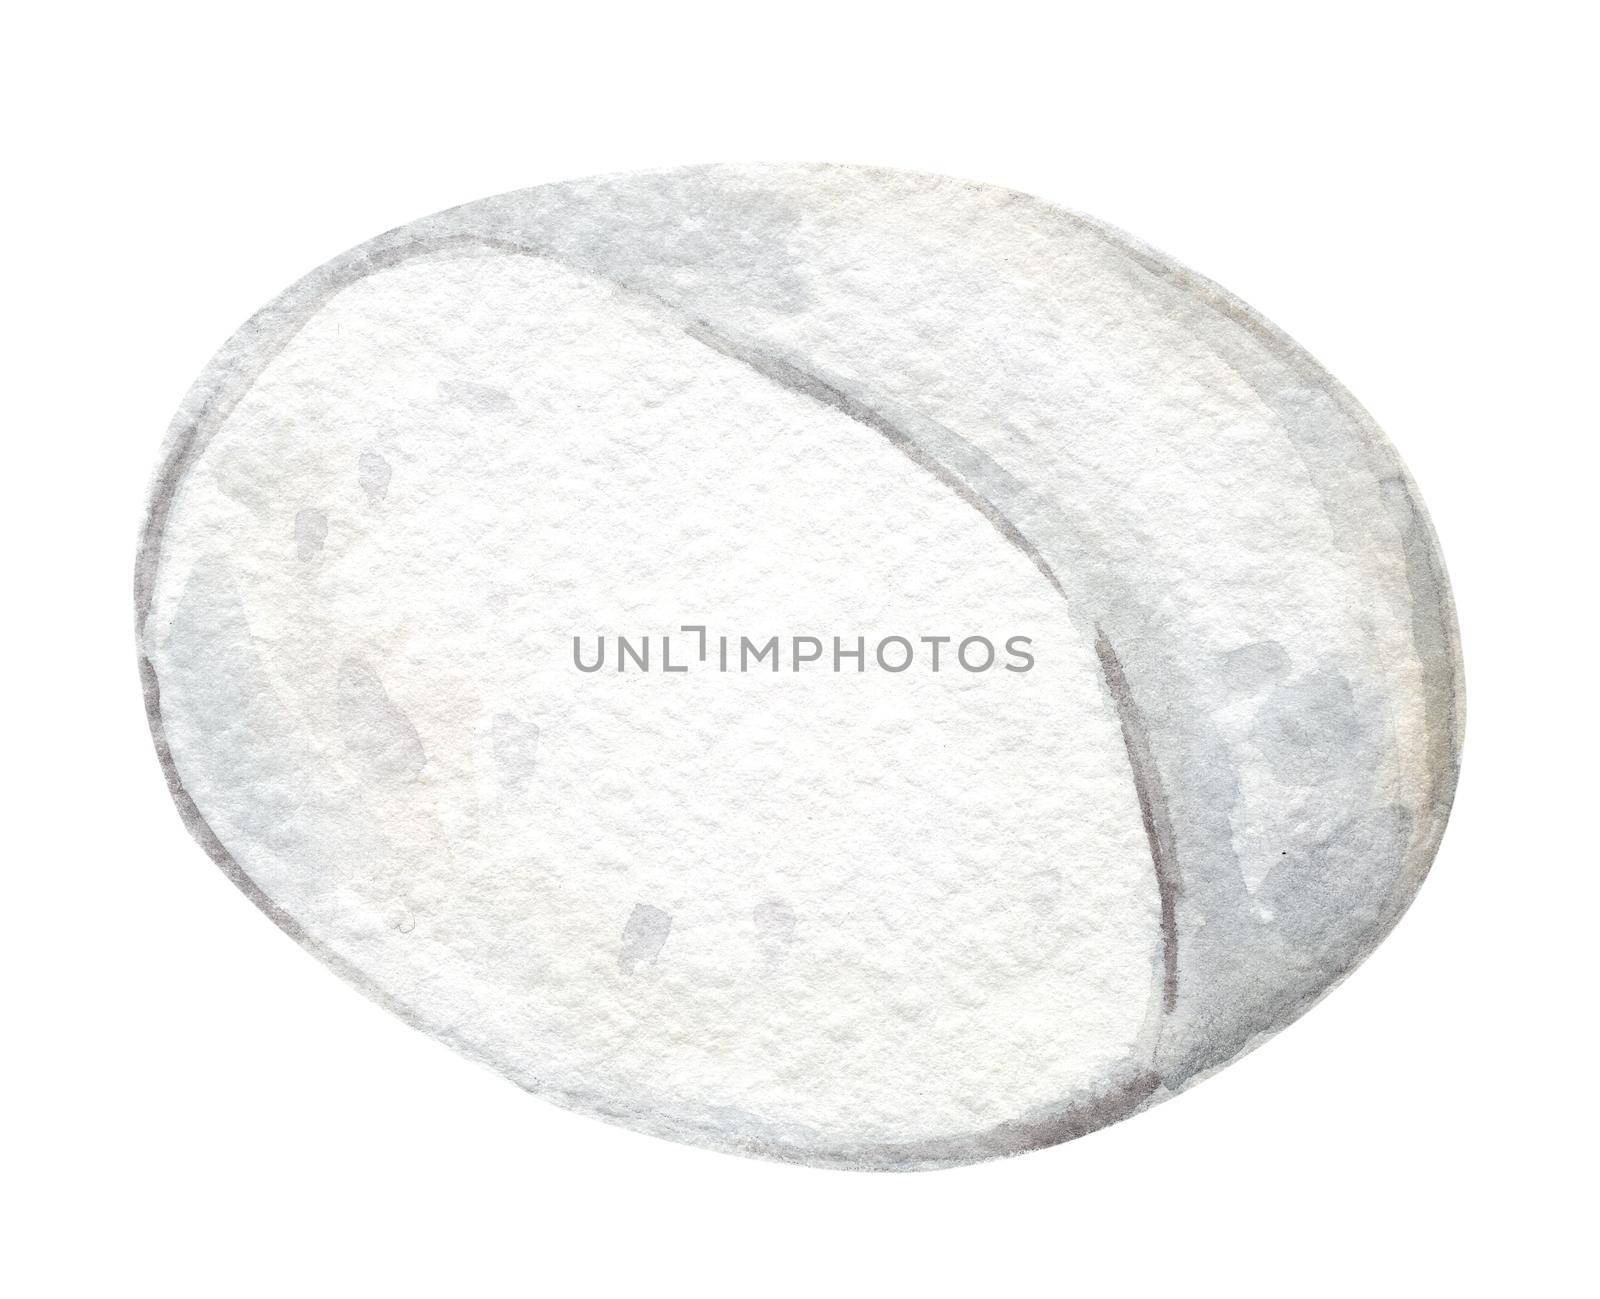 Watercolor mozzarella cheese isolated on white . Hand drawn dairy food illustration by dreamloud